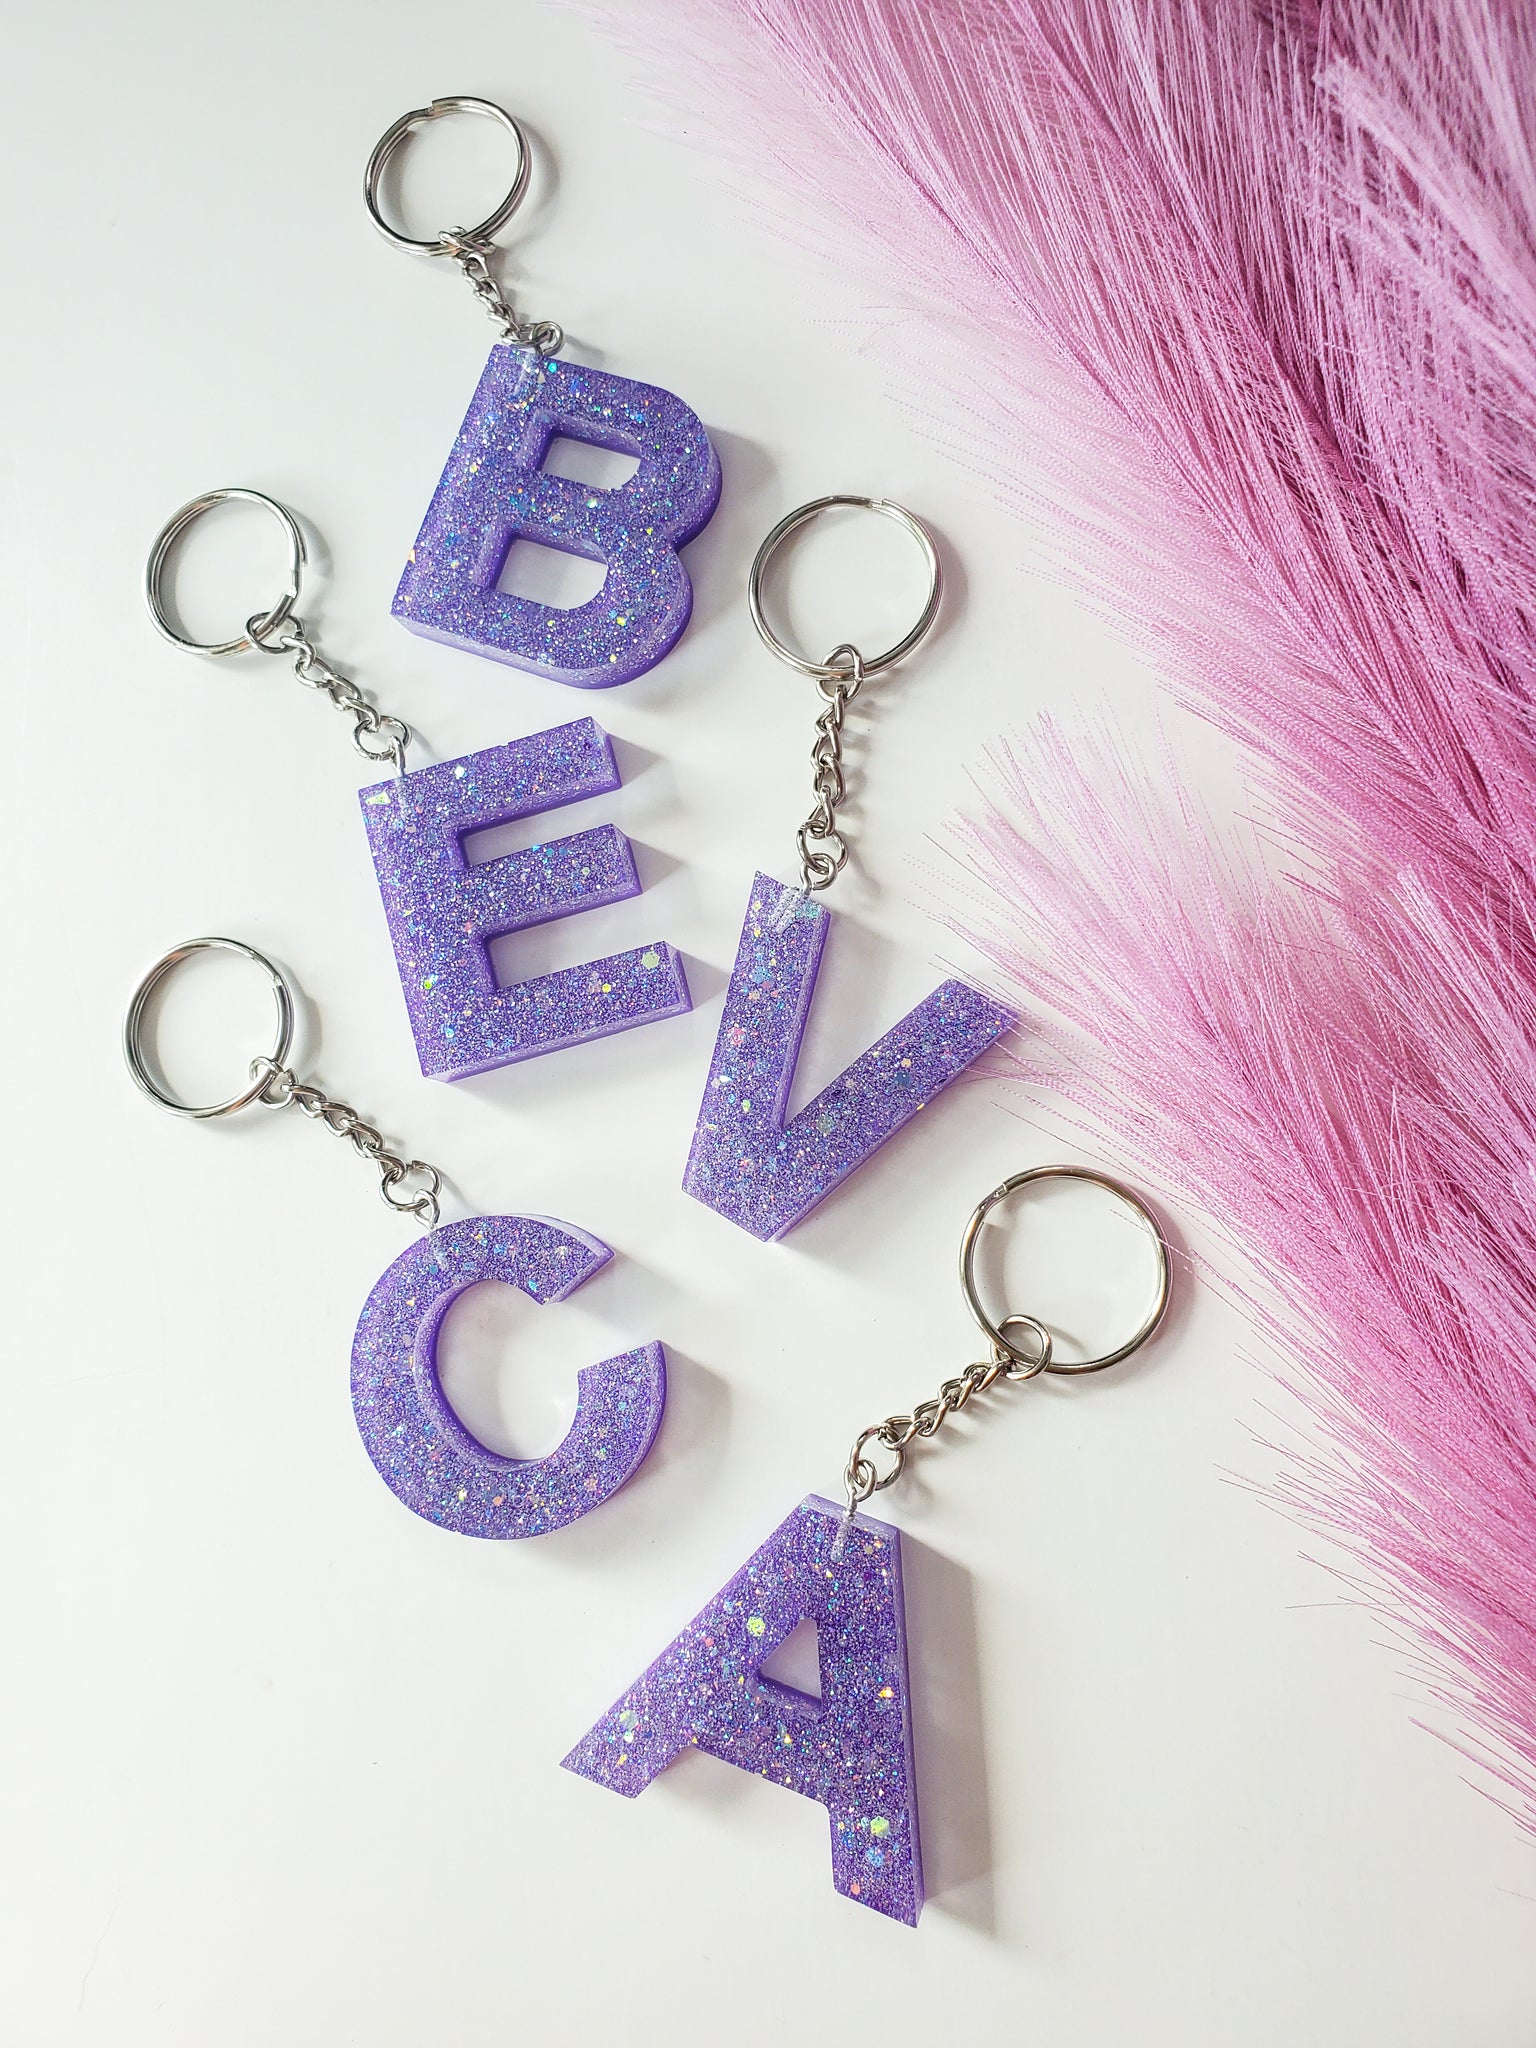 Resin Keychain, Round Shape, With Glittering Letters, Real Pink